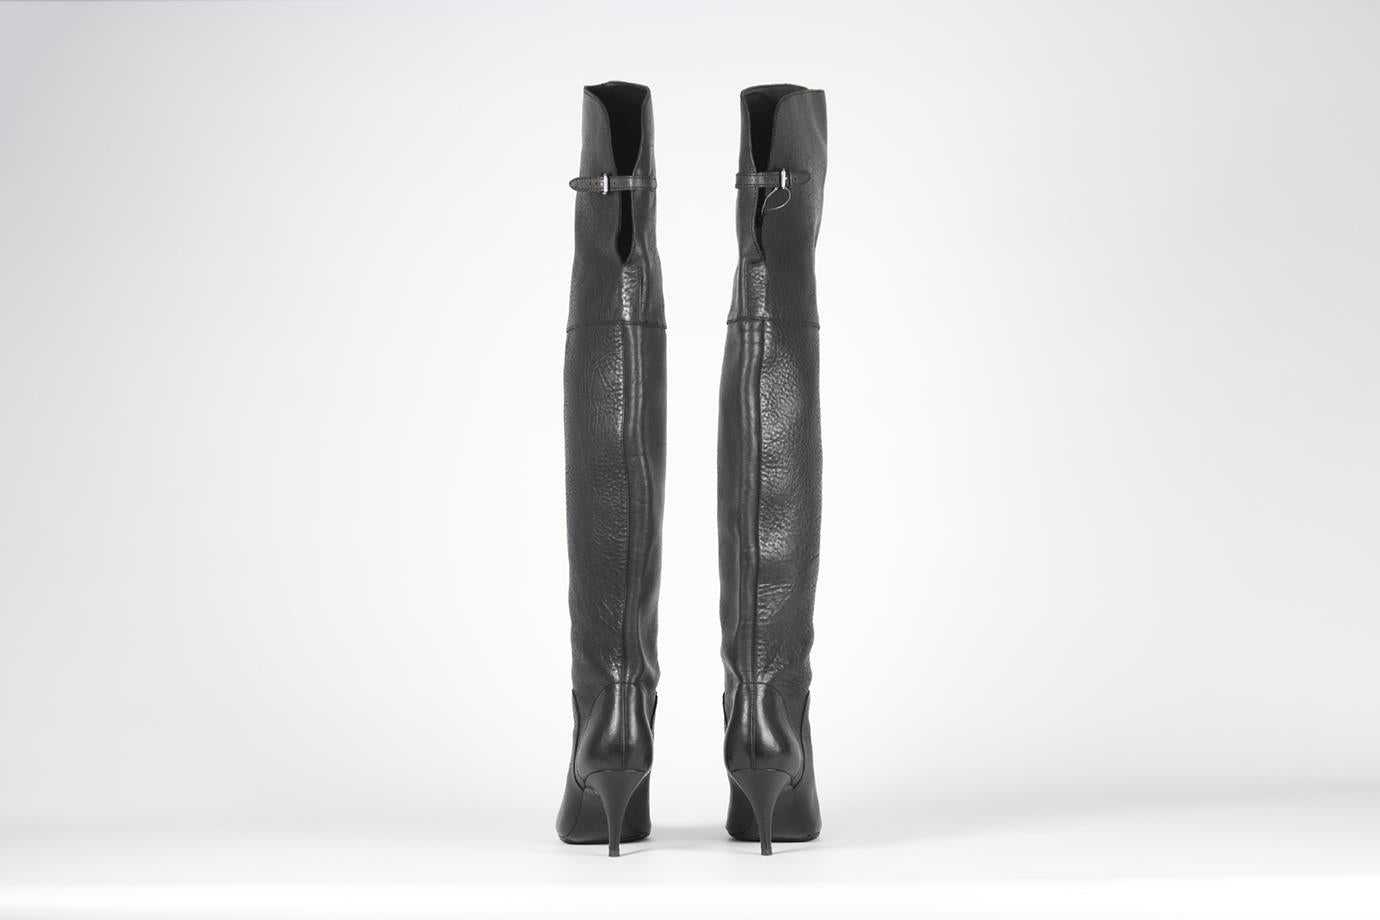 3.1 PHILLIP LIM LEATHER OVER THE KNEE BOOTS EU 40 UK 7 US 10